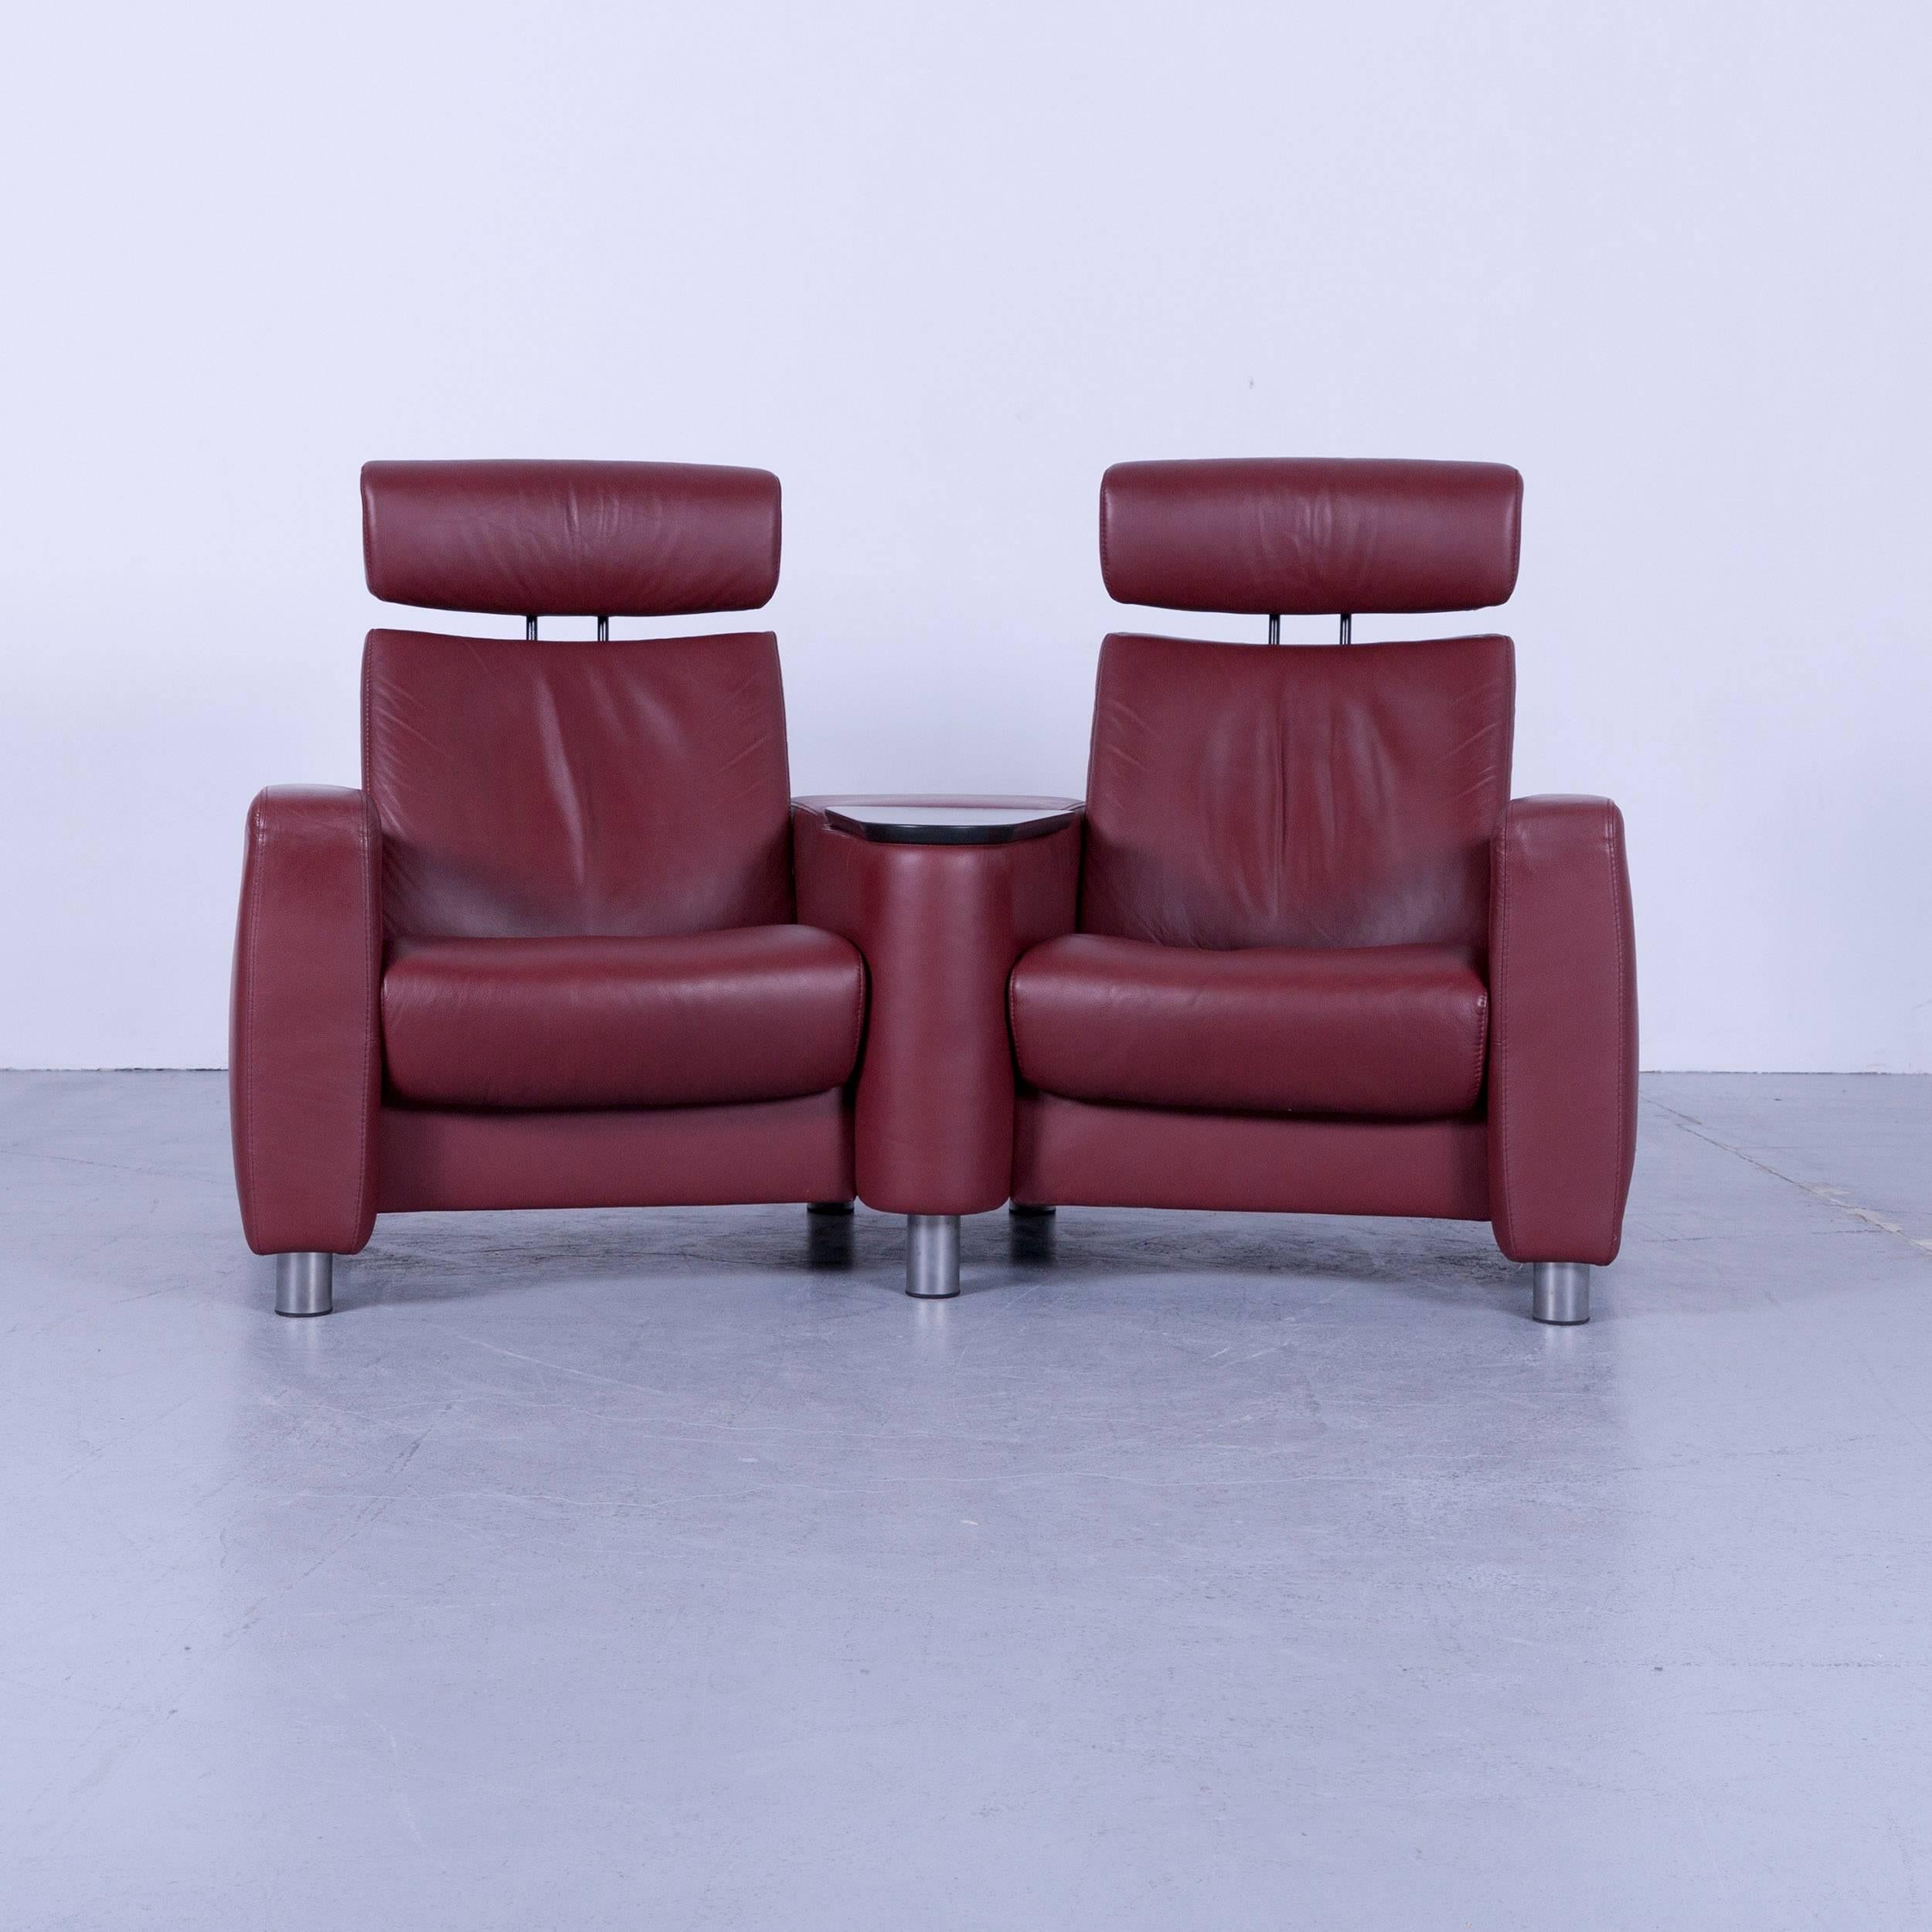 An Ekornes Stressless Arion leather cinema-sofa red recliner.




















  